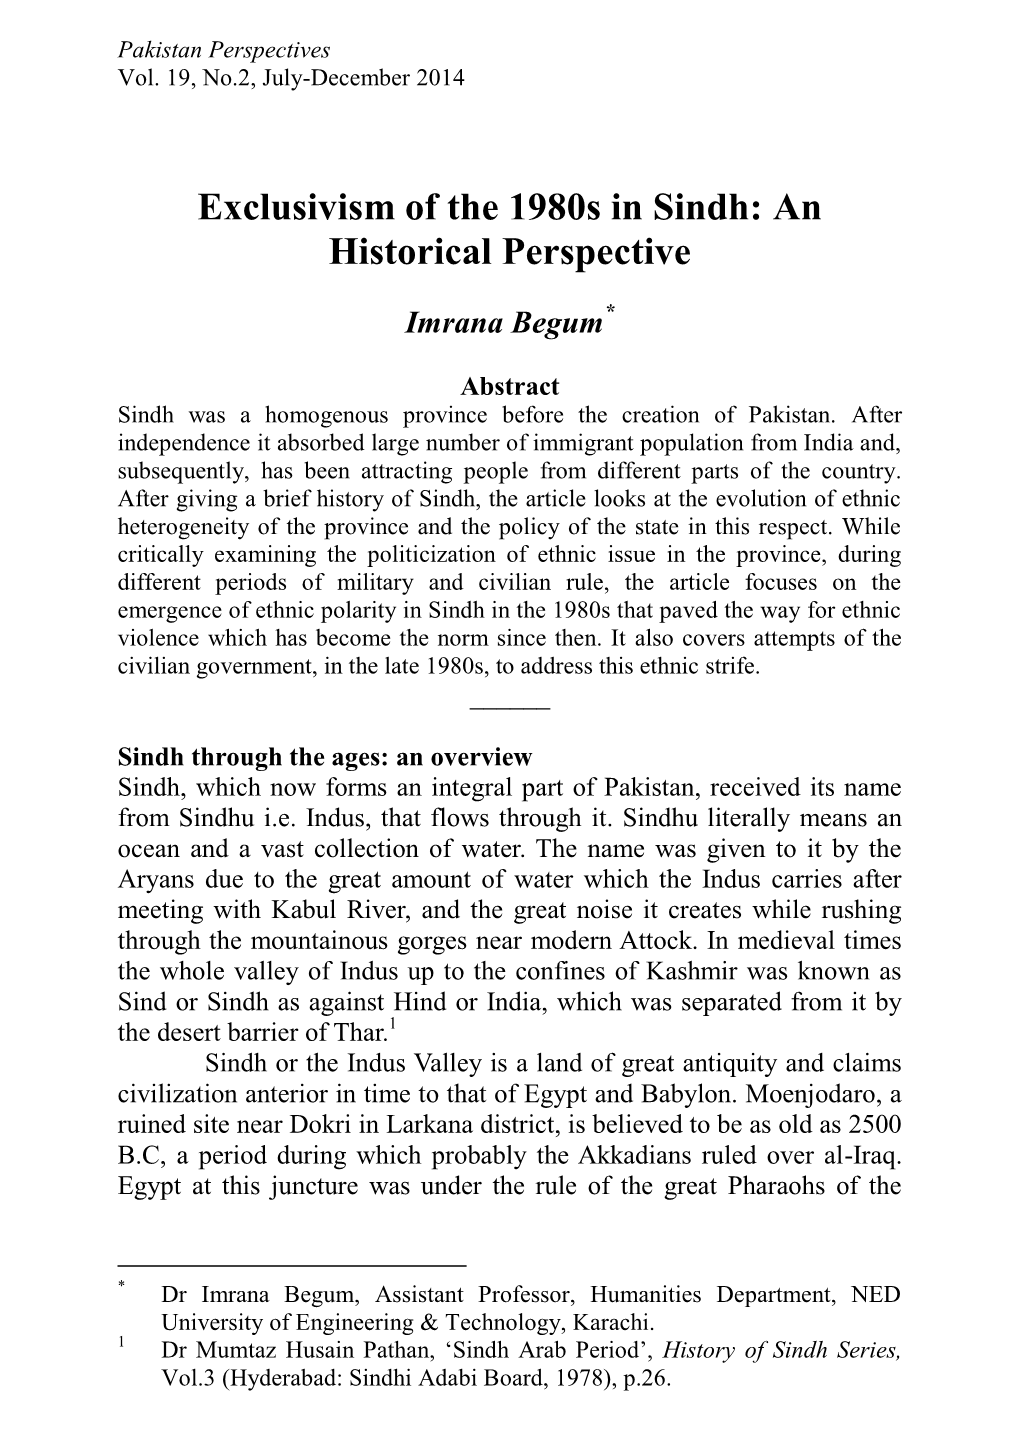 Exclusivism of the 1980S in Sindh: an Historical Perspective